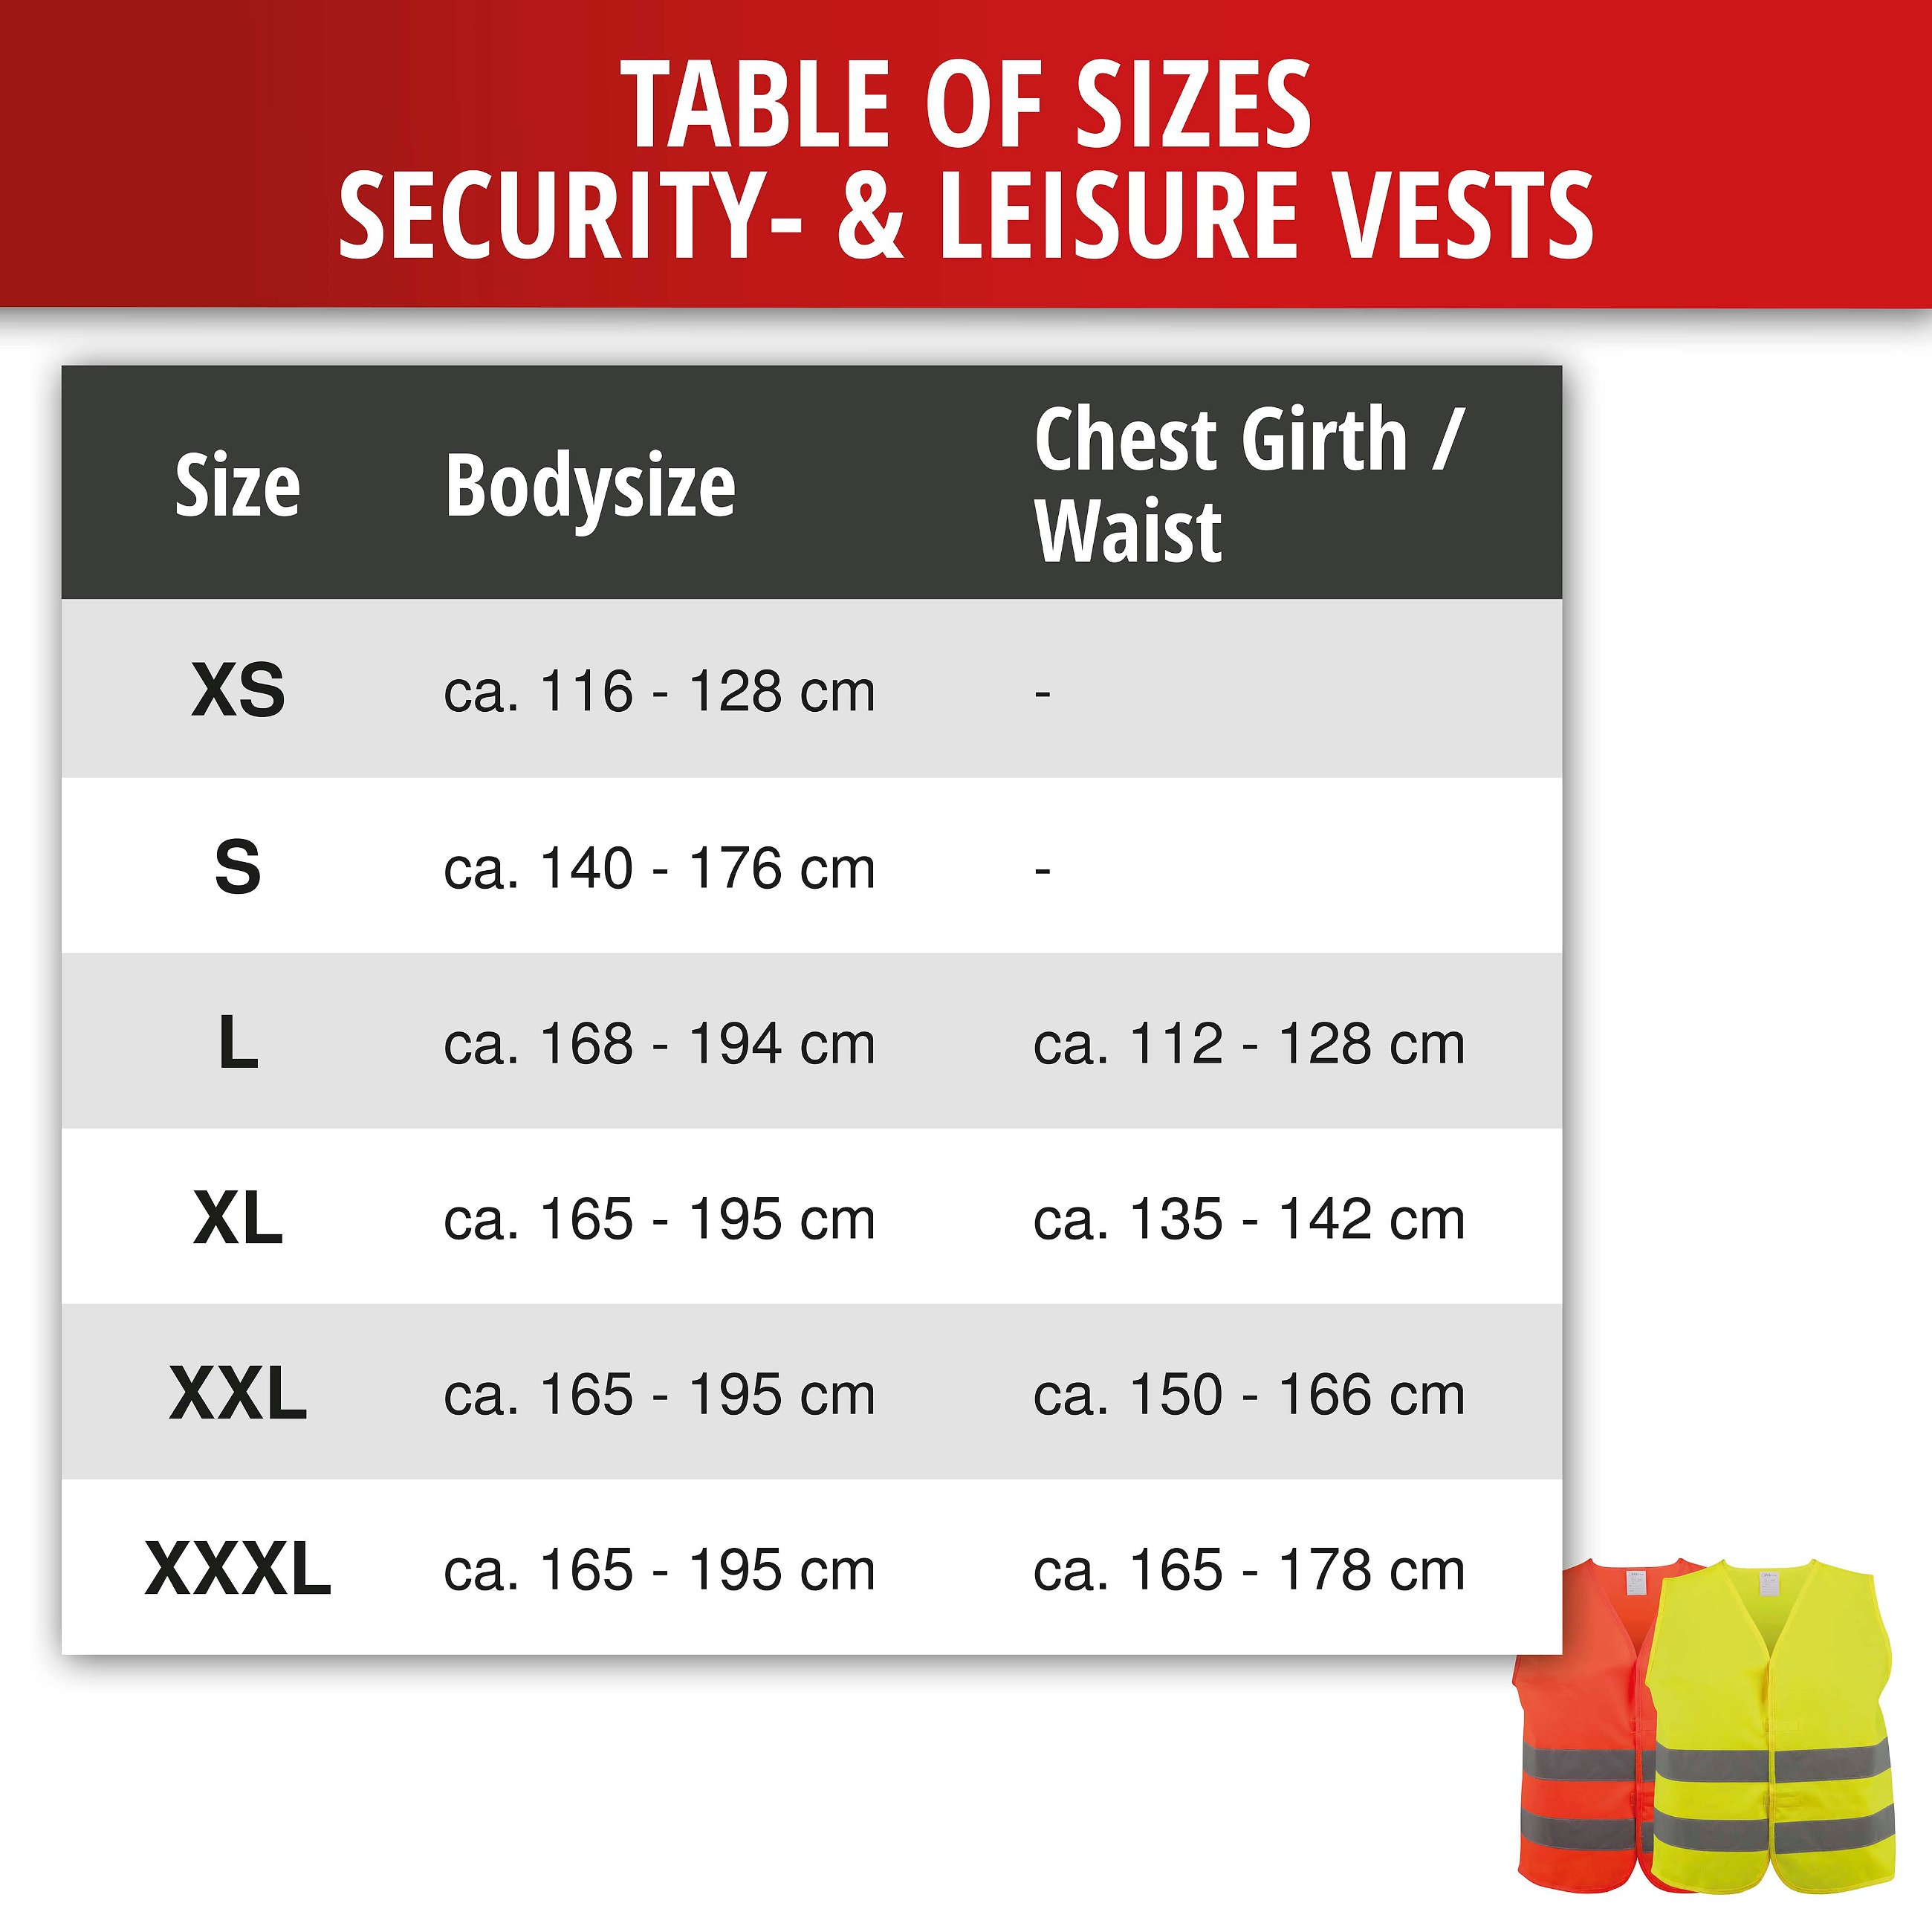 Safety vest size XXXL for adults Yellow EN 20471/2